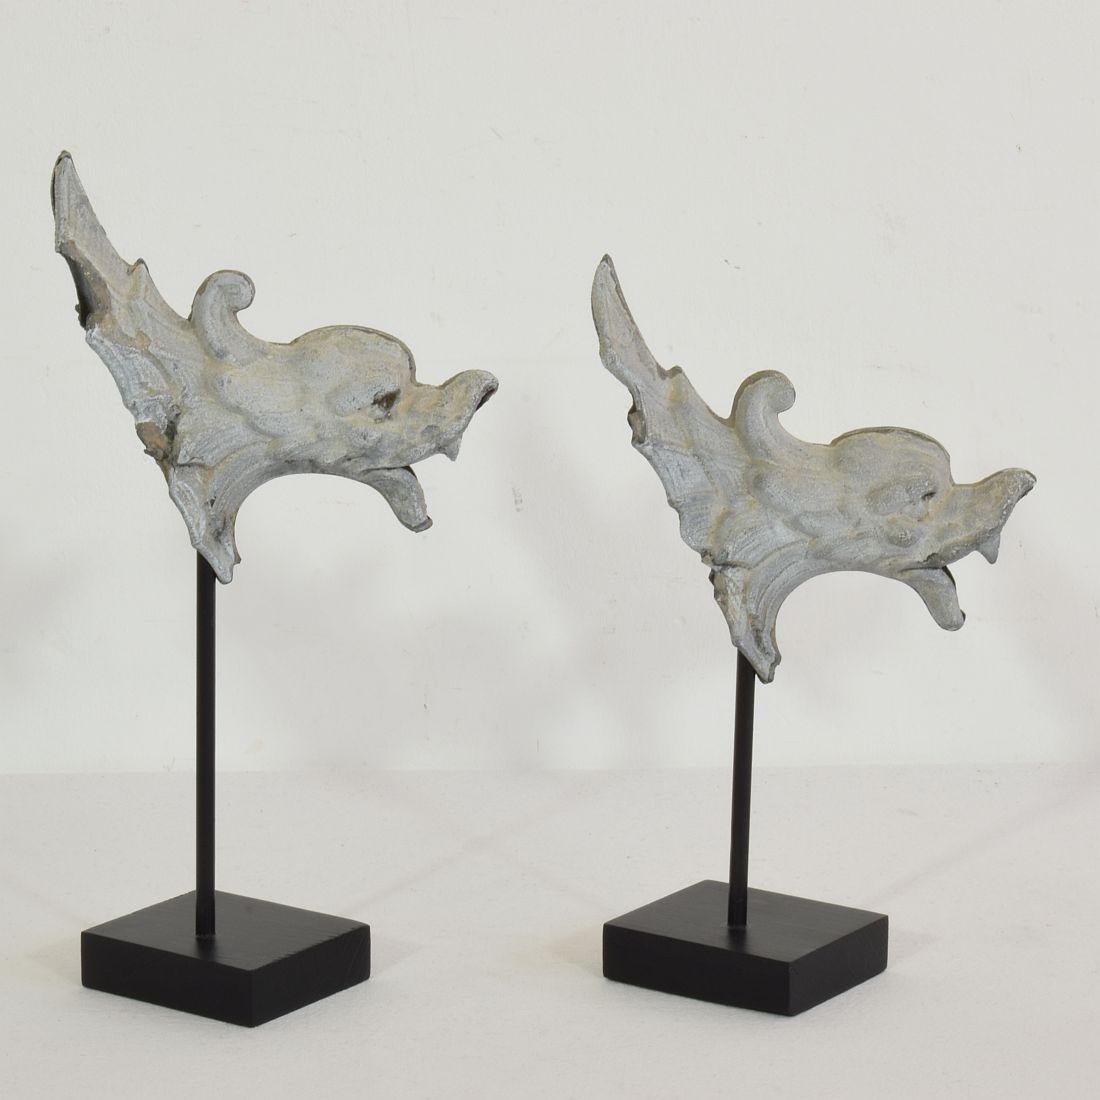 Pair of Small 19th Century French Zinc Roof Ornaments/ Gargoyles 2